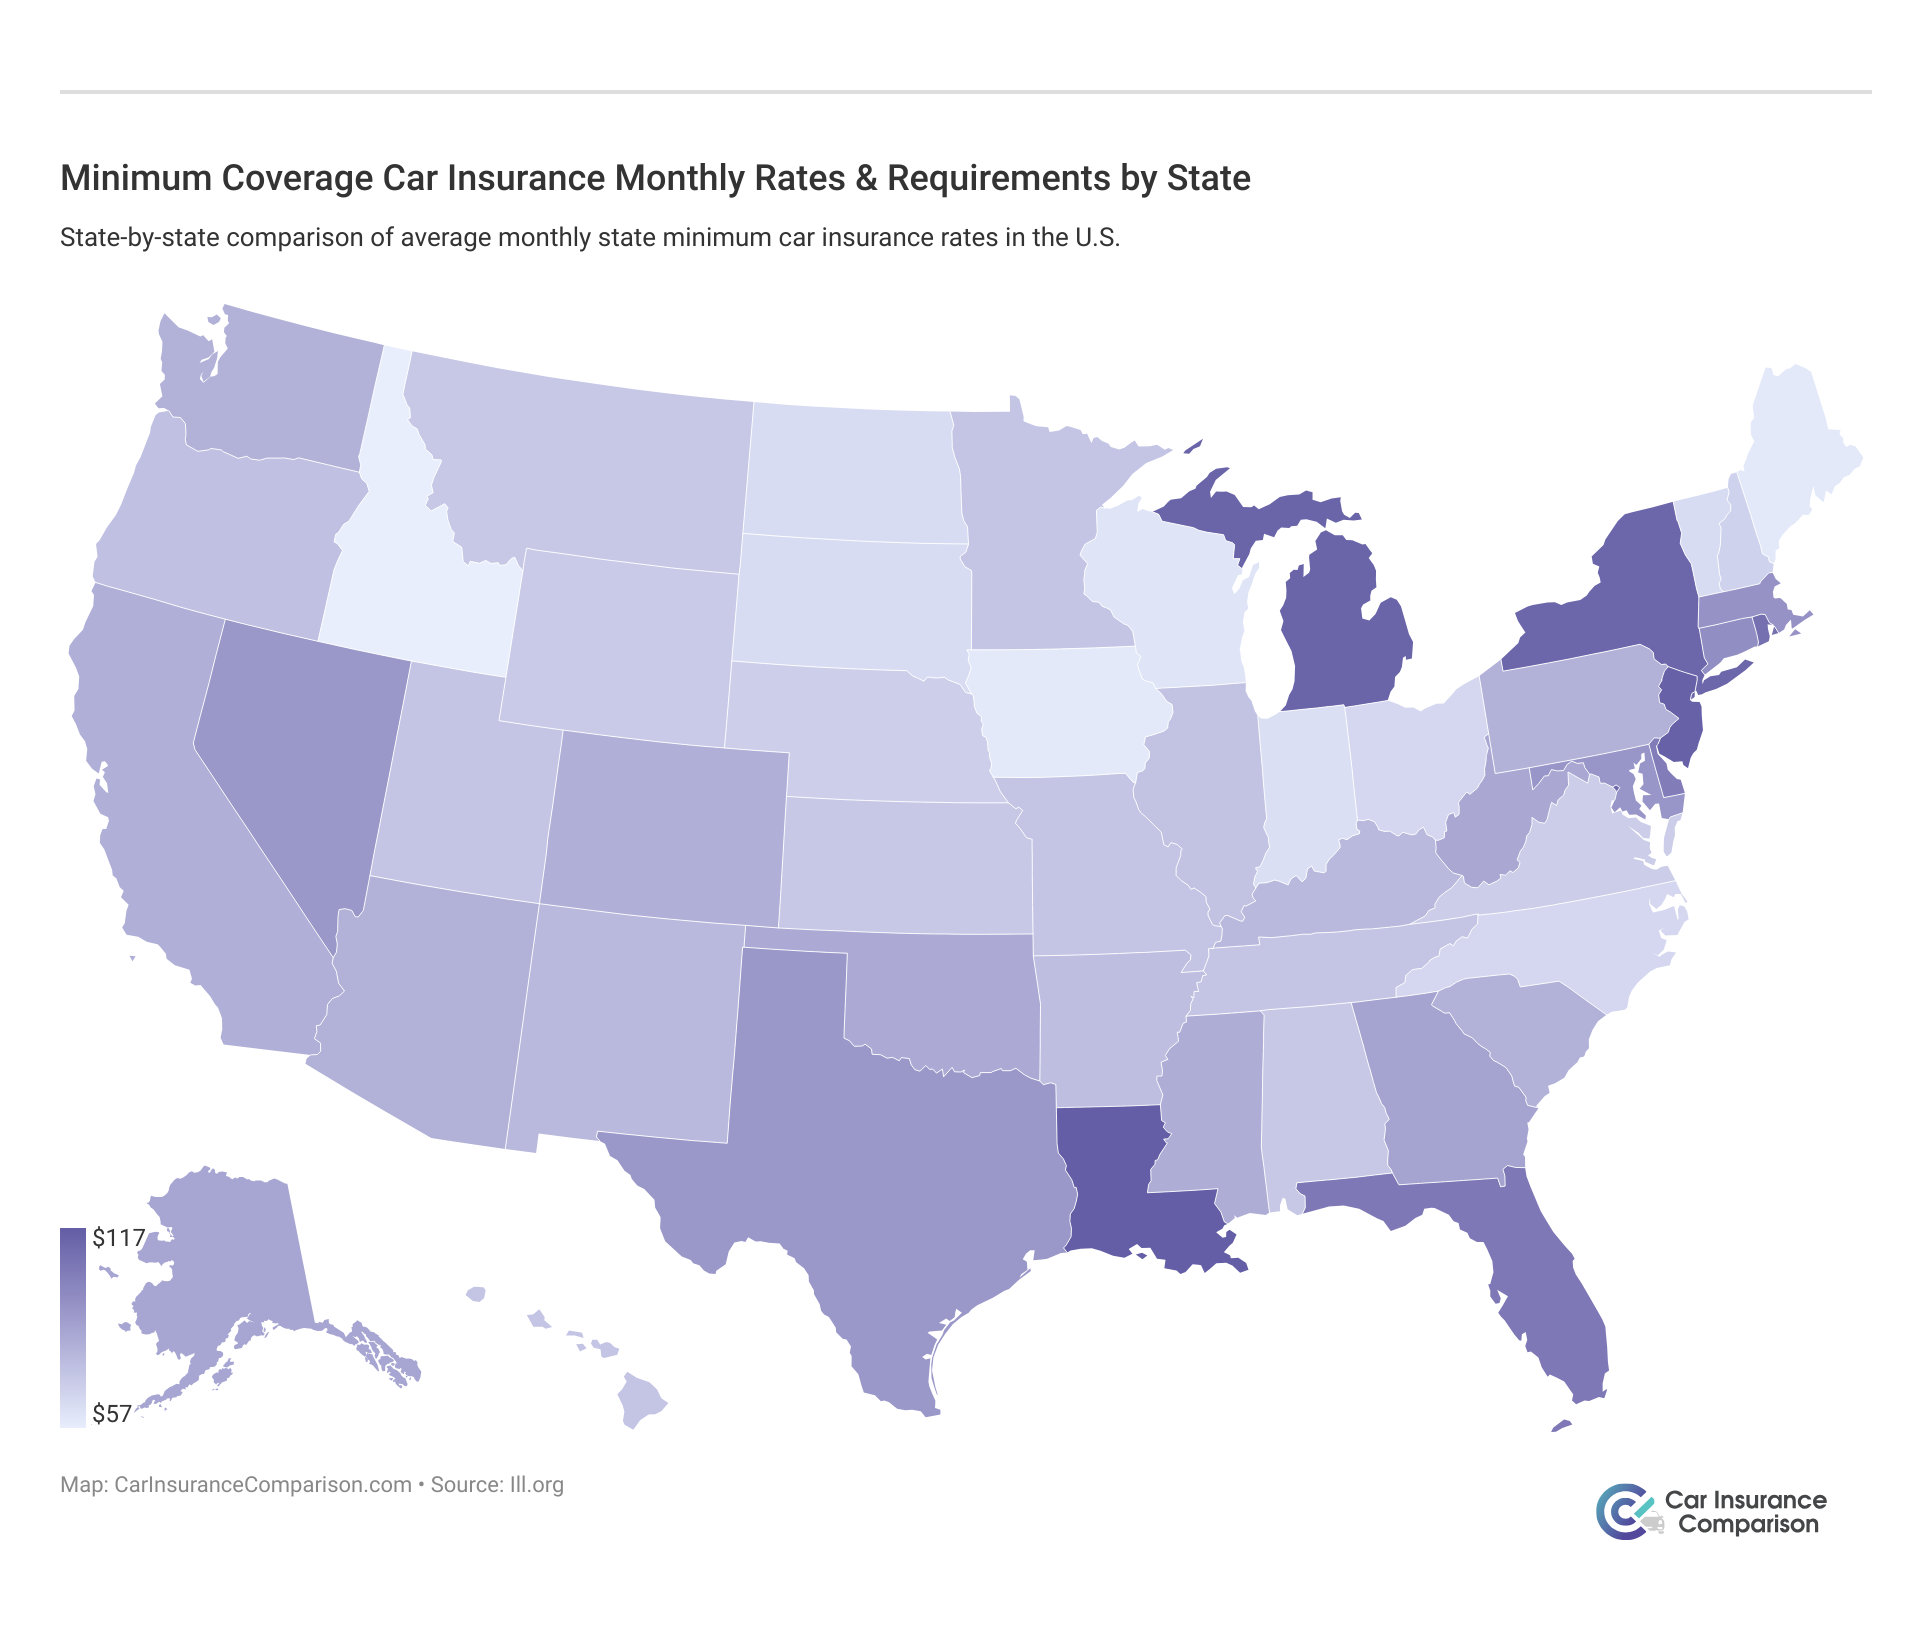 <h3>Minimum Coverage Car Insurance Monthly Rates & Requirements by State</h3>